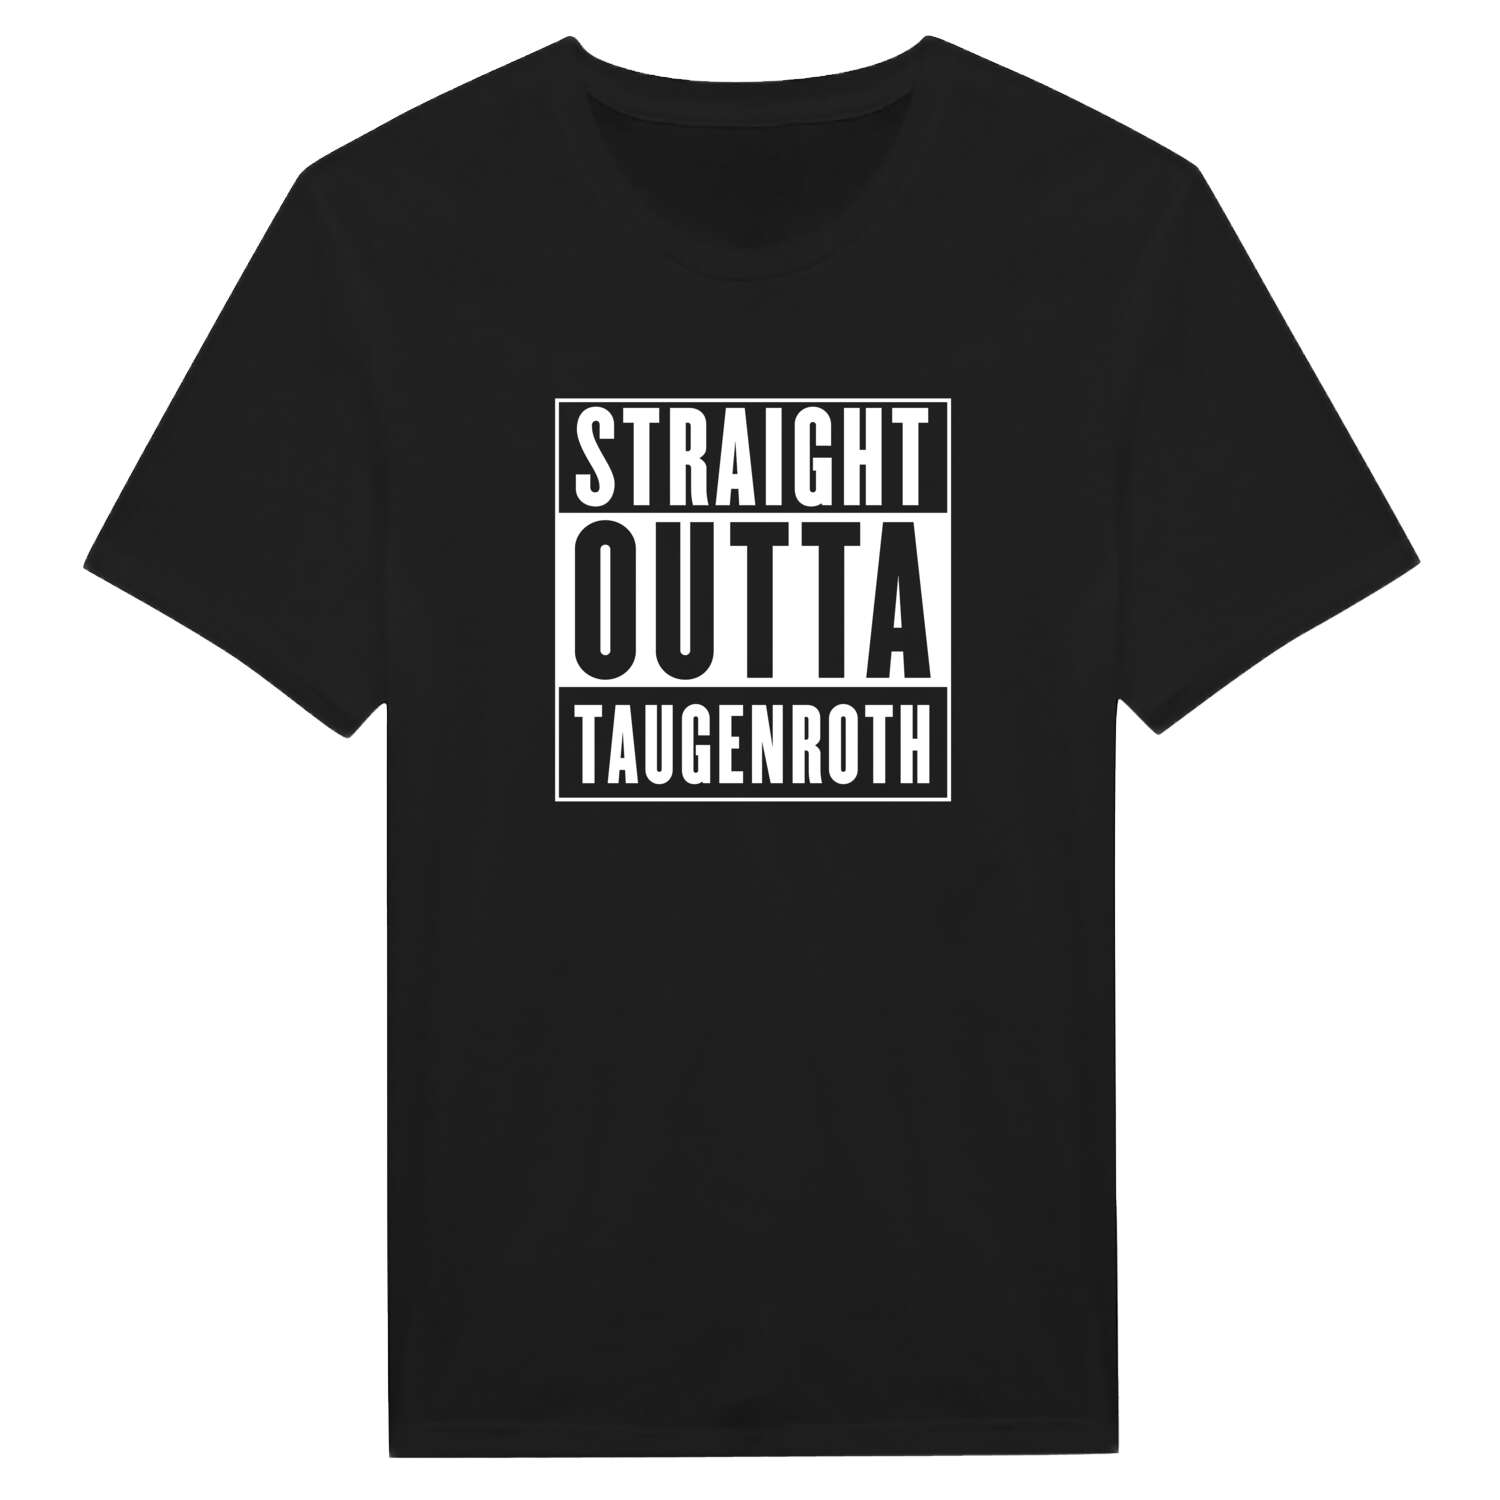 Taugenroth T-Shirt »Straight Outta«